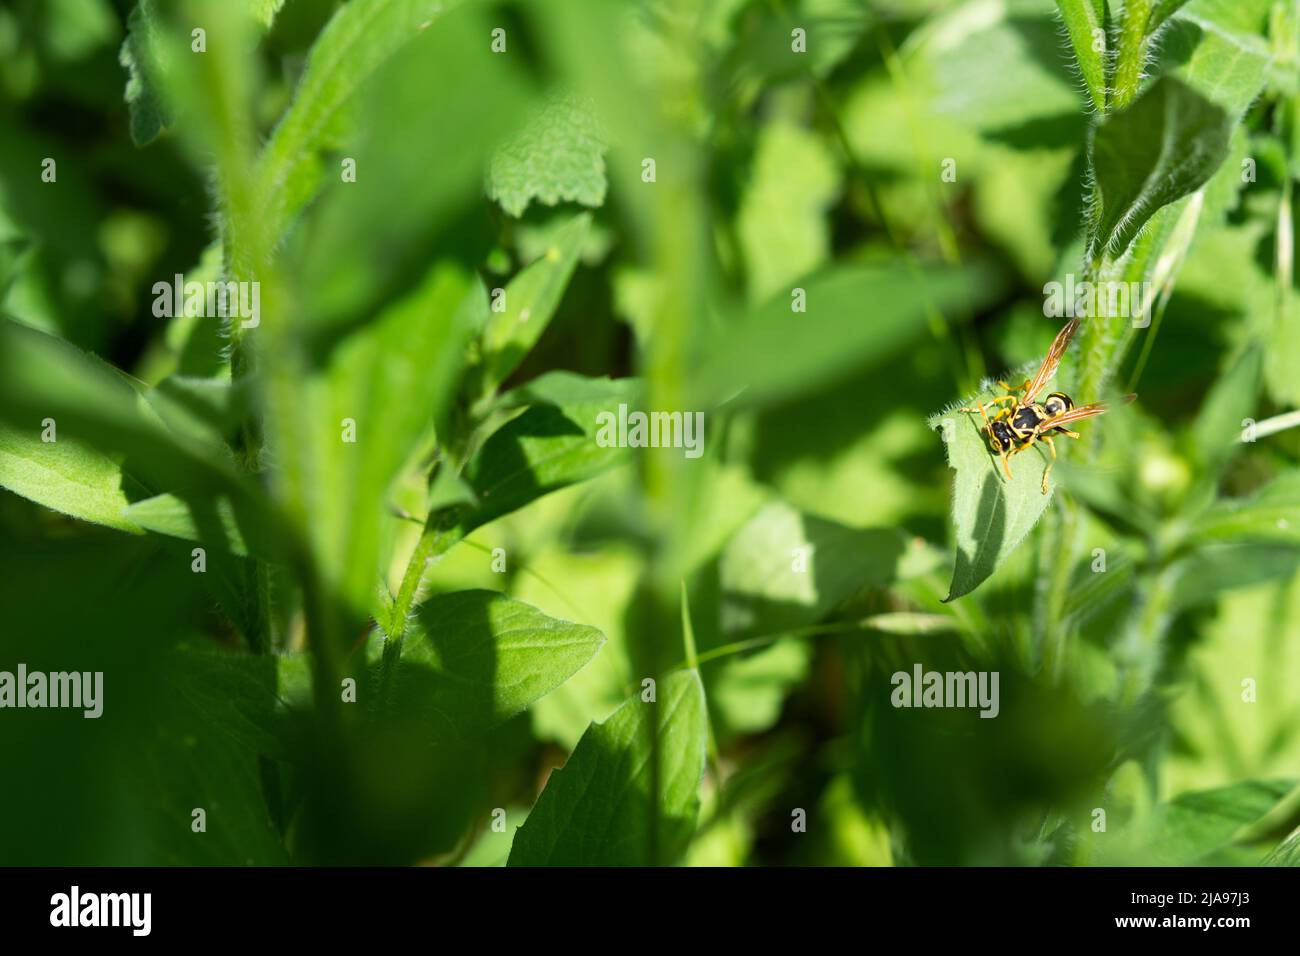 Wasp in the grass. Wasp close-up on a green grassy background on a sunny spring day. A series of shots of a wasp. Stock Photo